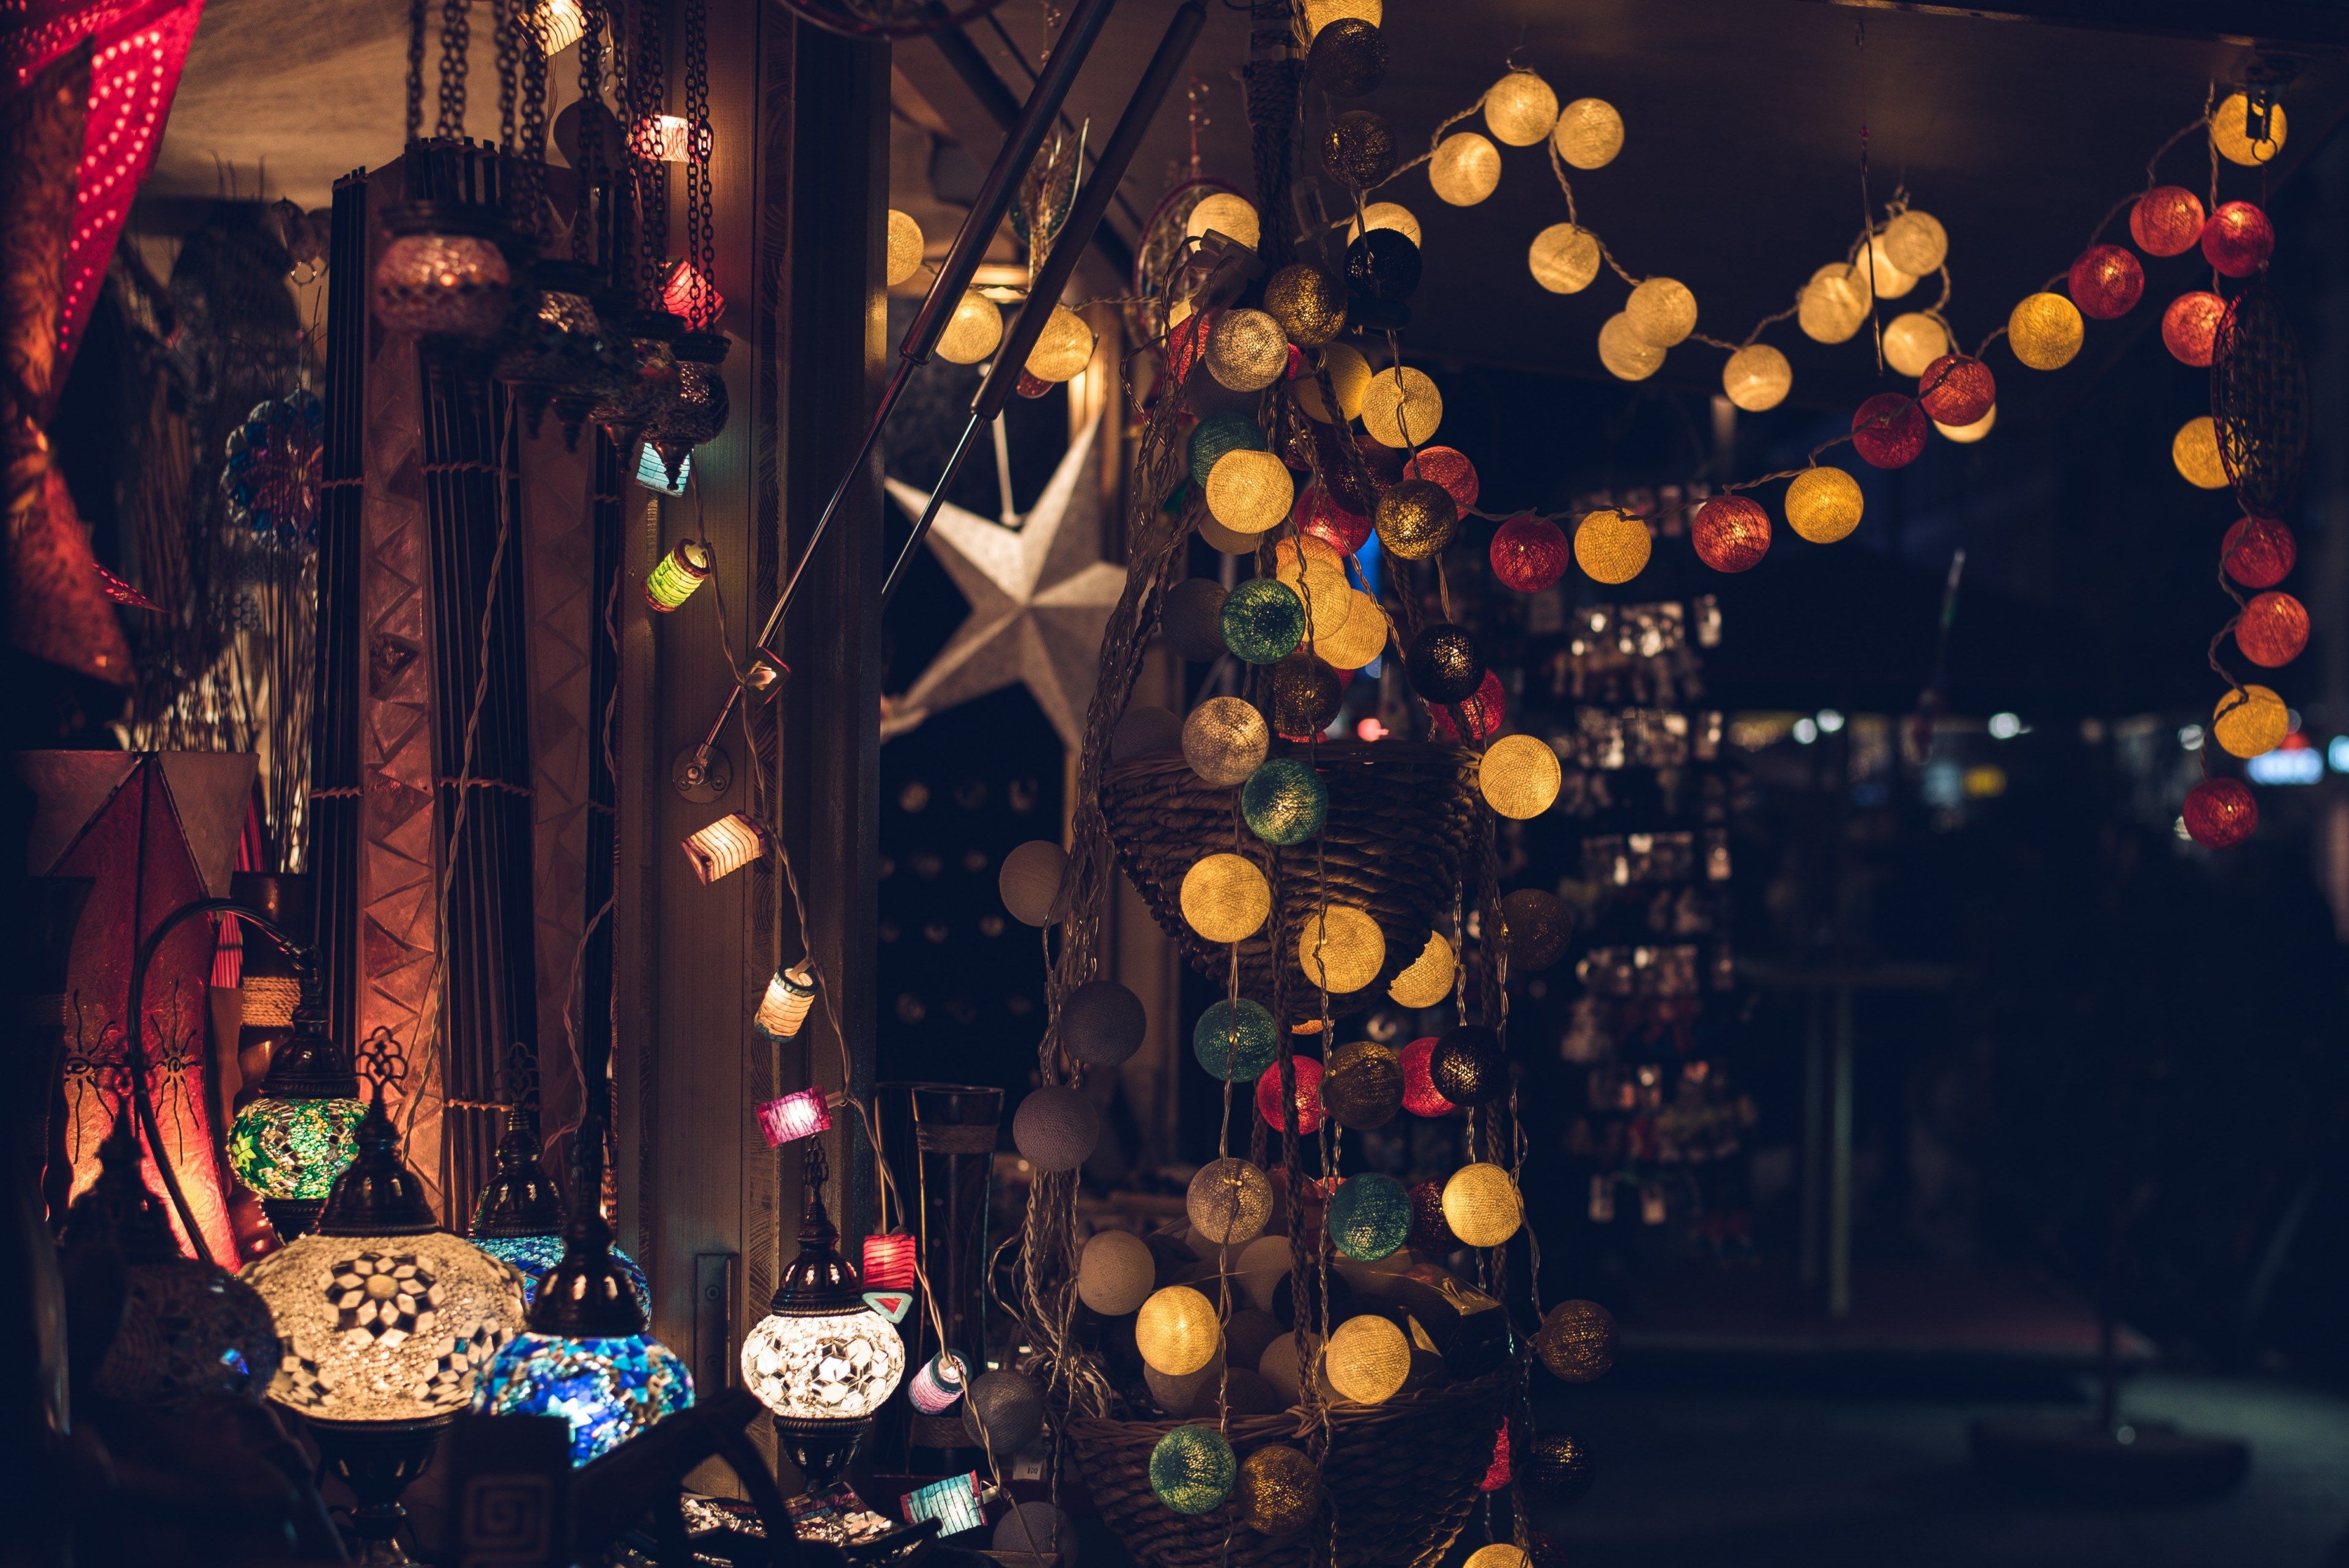 A market stall with lots of different hanging decorations - Christmas lights